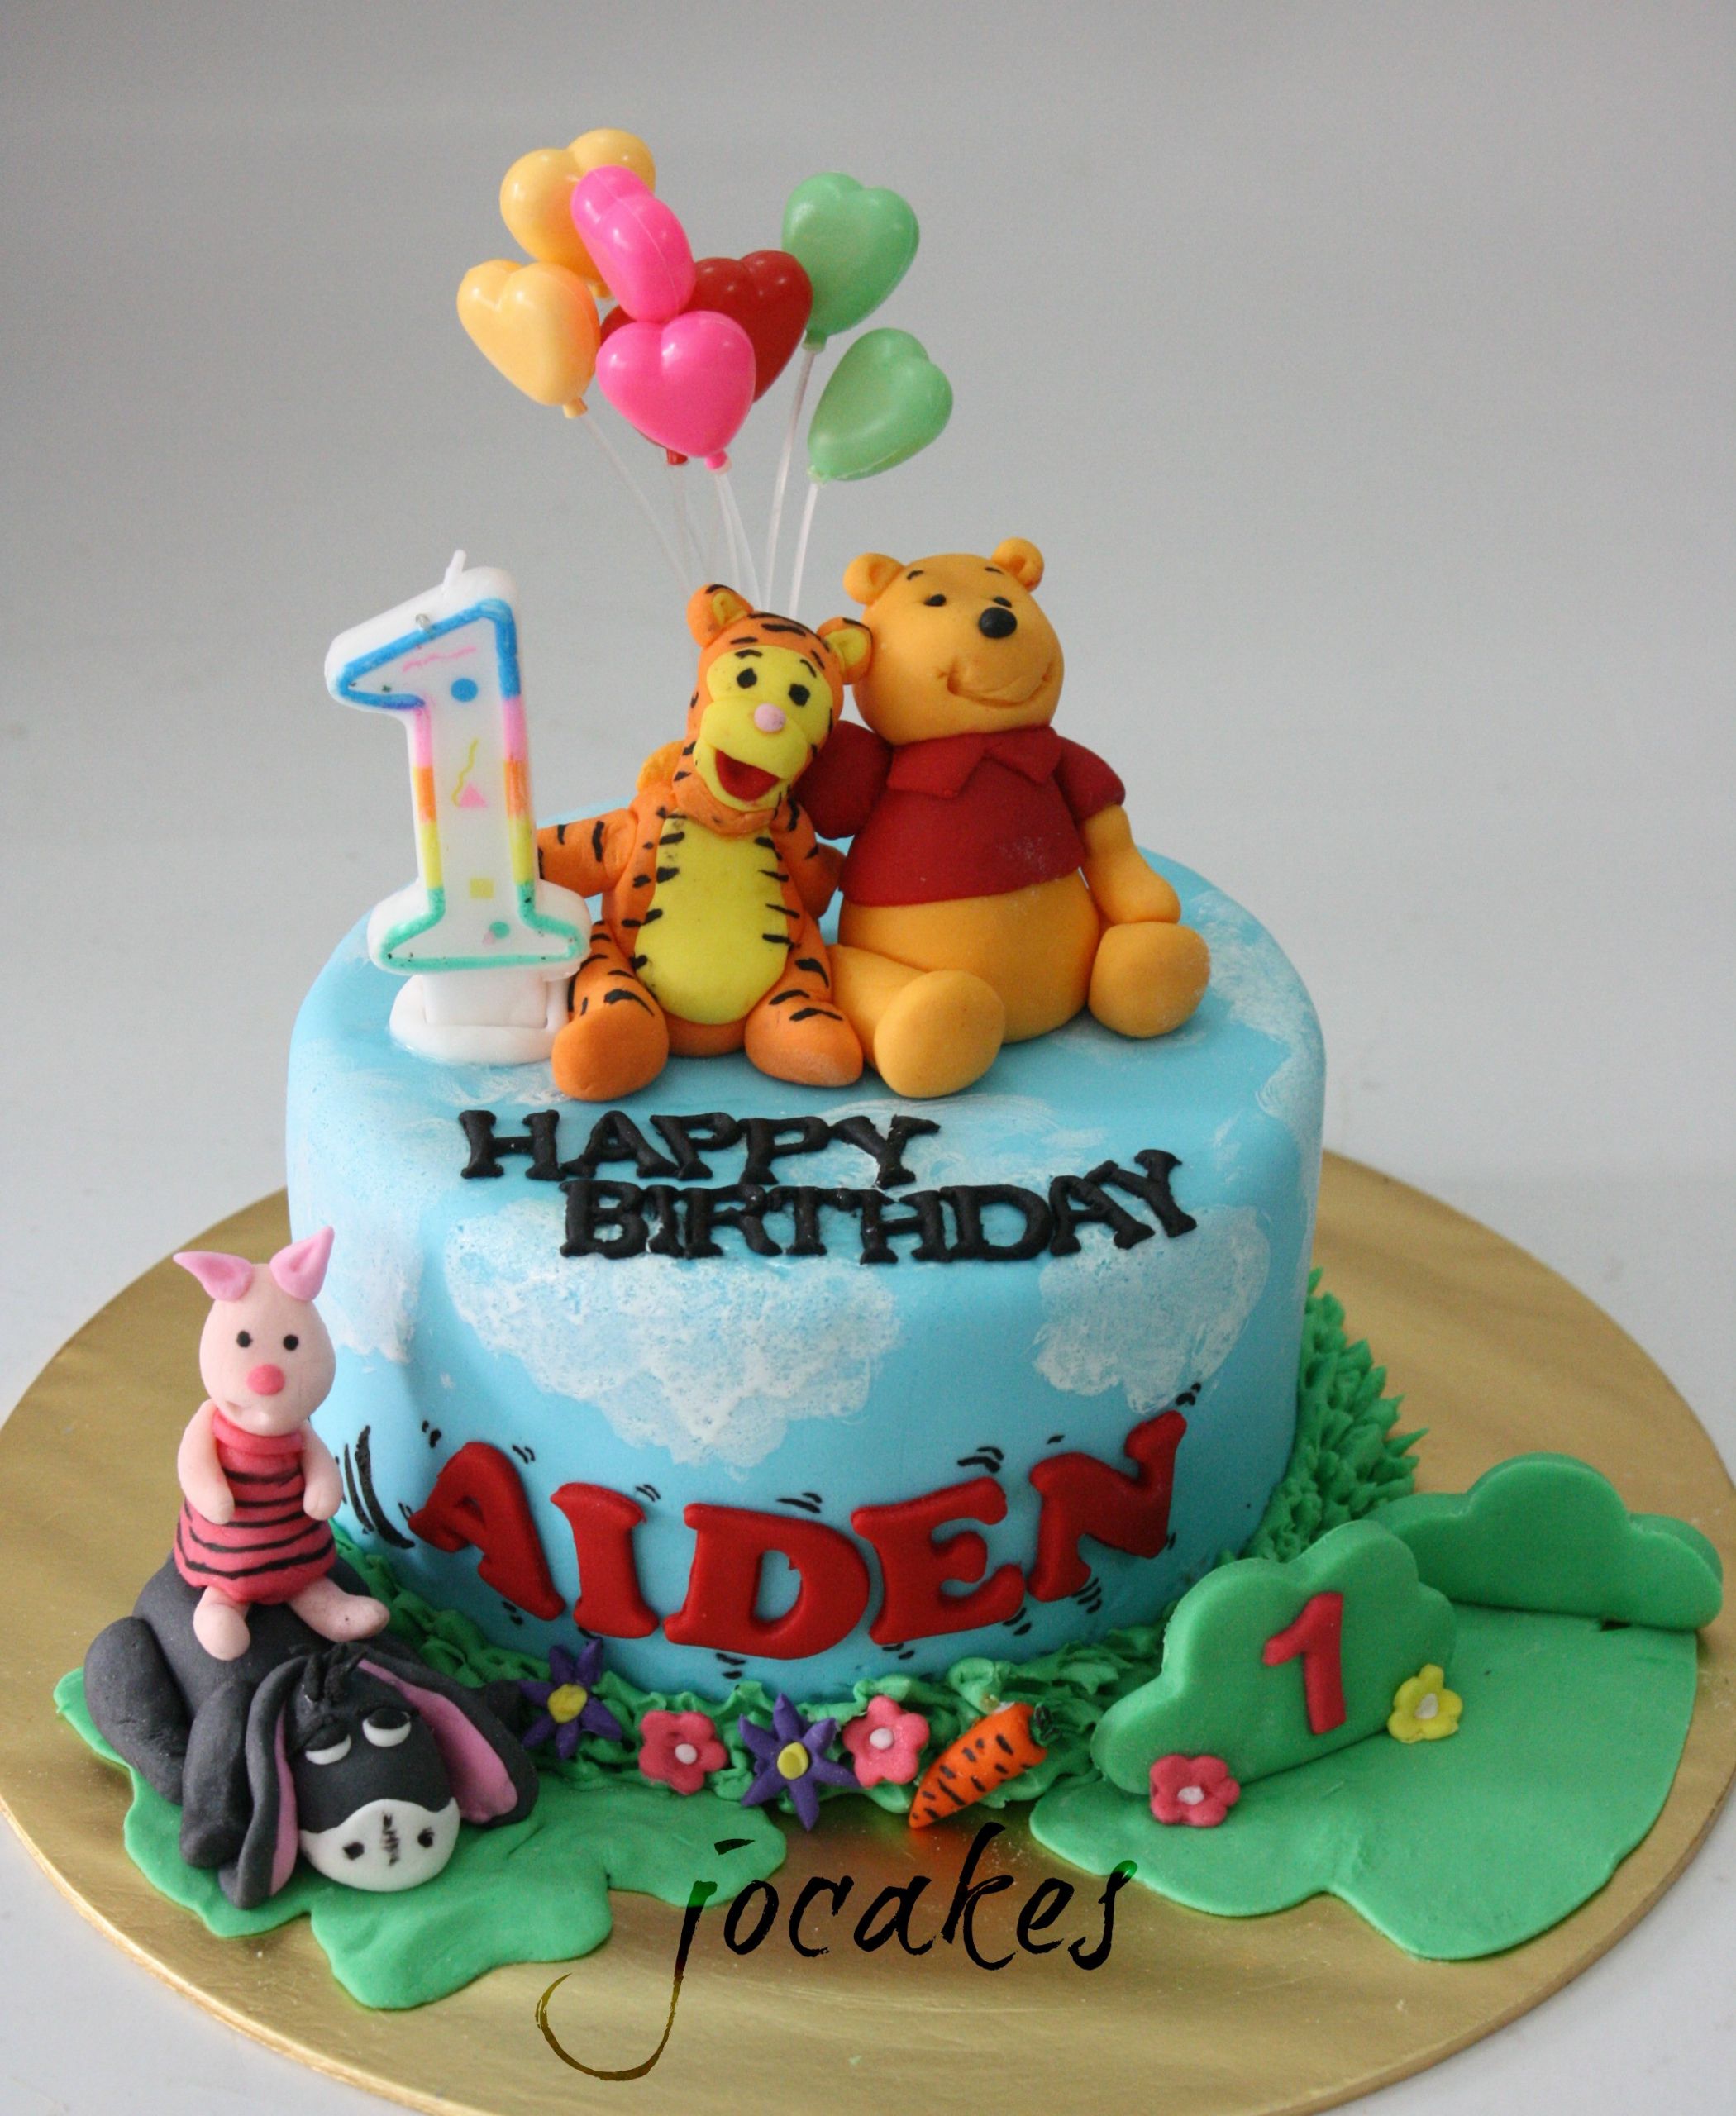 Birthday Cake For 1 Year Old
 Winnie the Pooh and friends cake for 1 year old boy Aiden